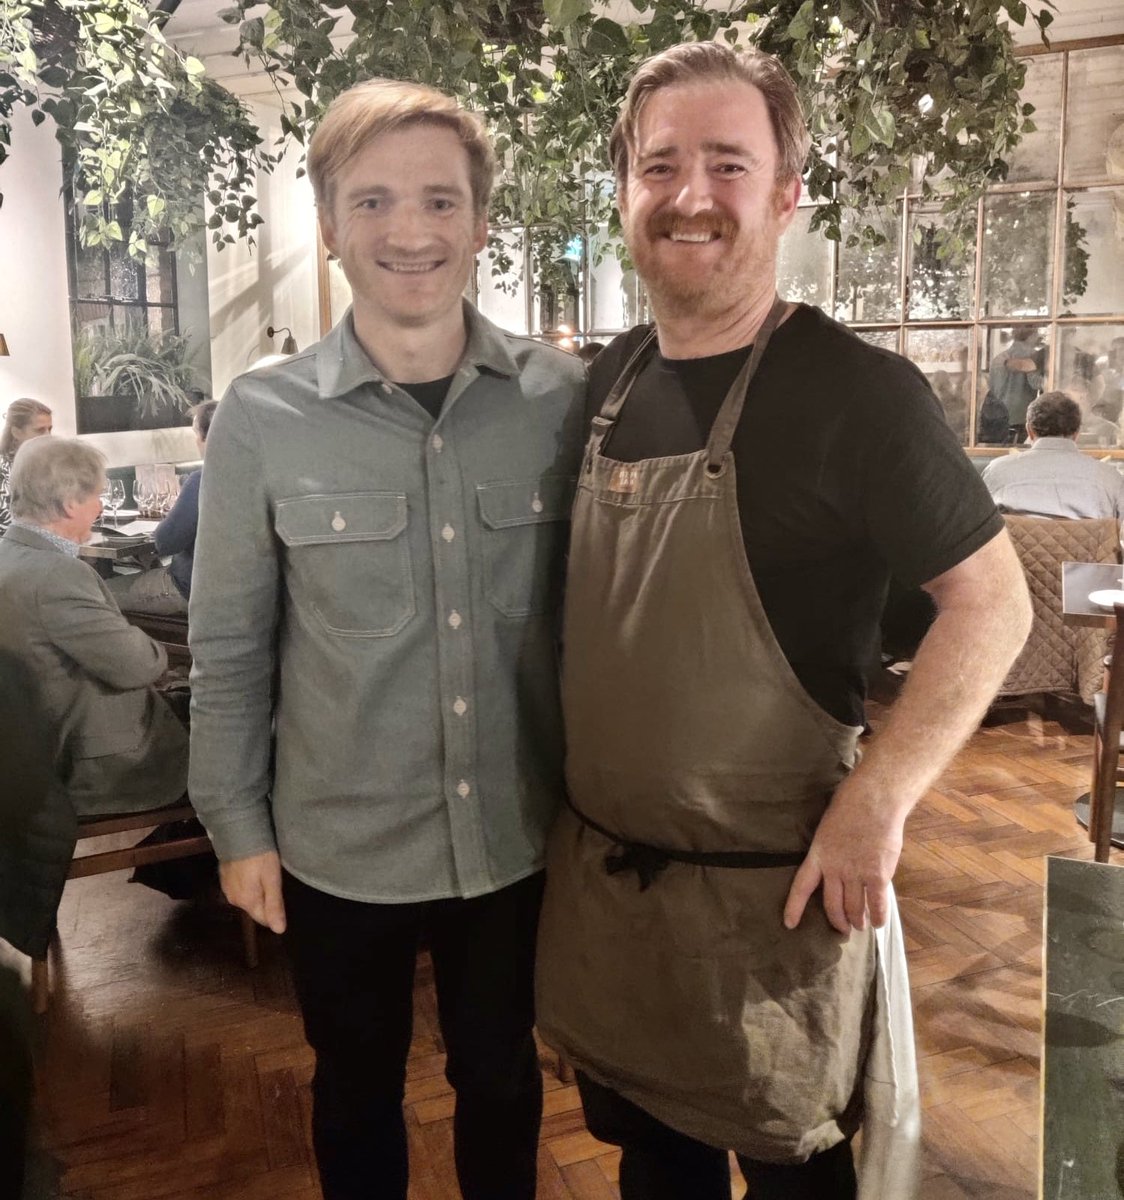 Our wine dinner dream team 😍 @CharlieStein1 does the wine, @JackStein does the food and their guests get to enjoy both with culinary tales galore. @SteinBarnes